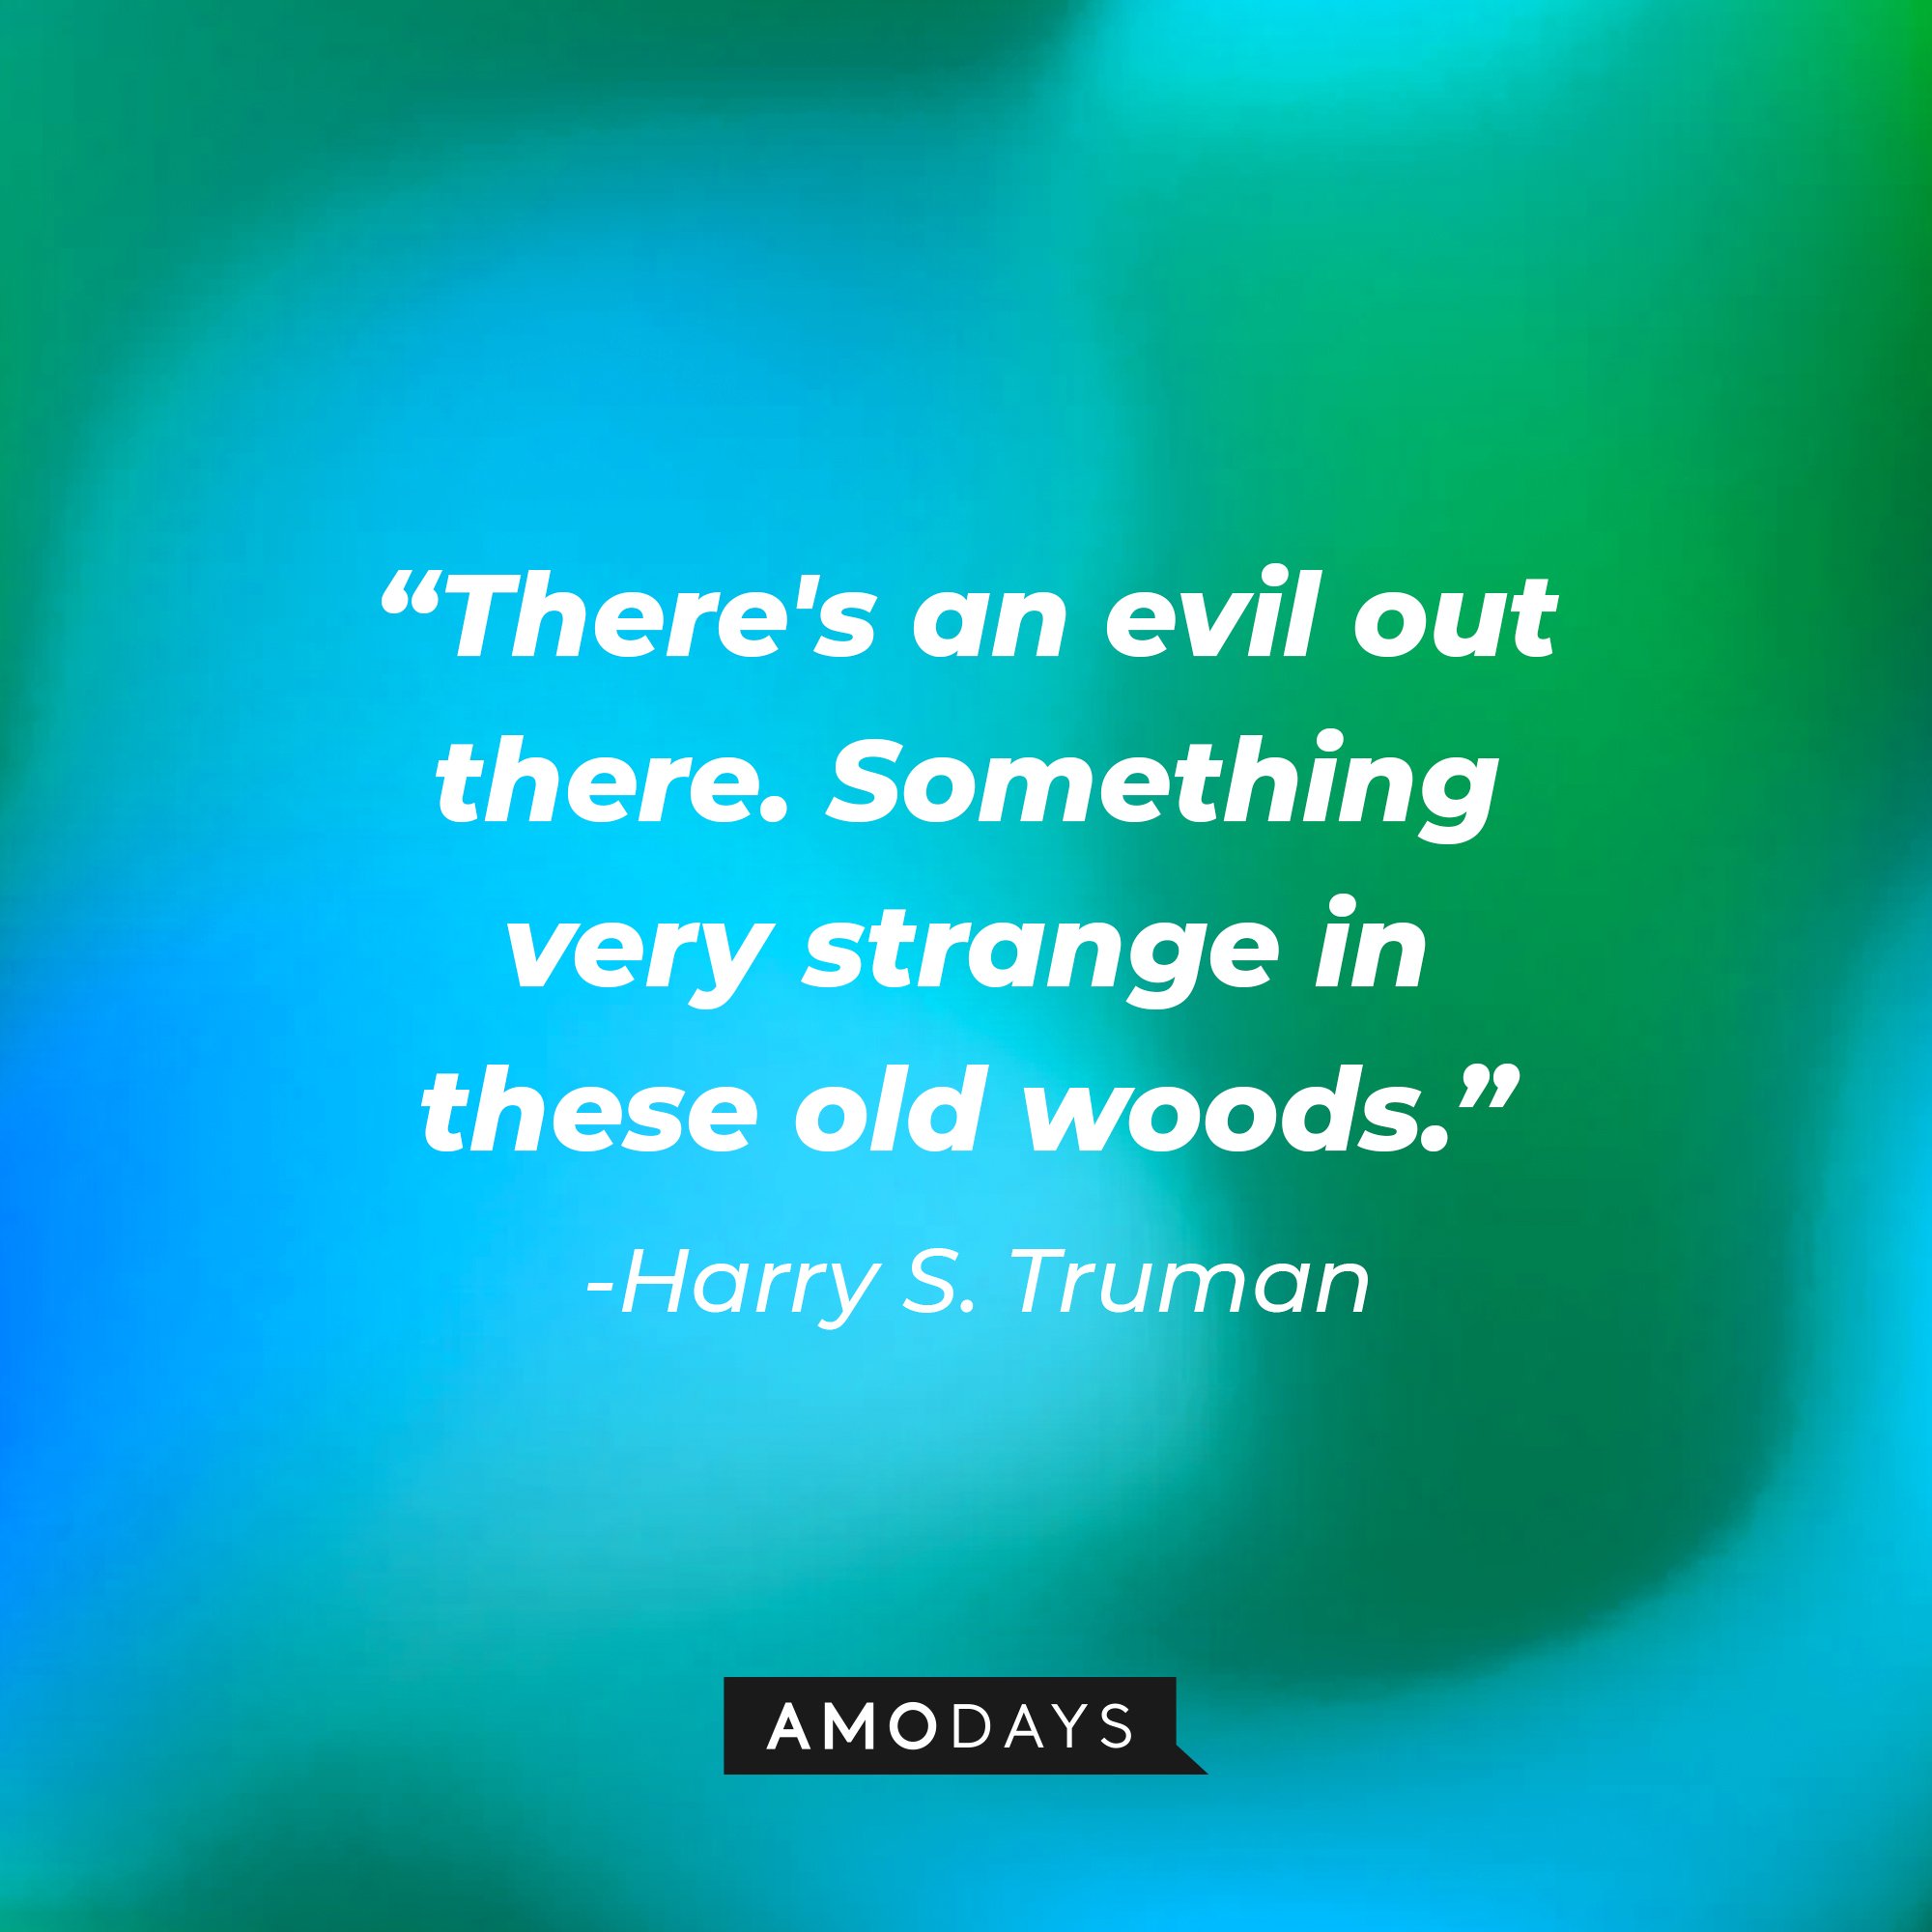  Harry S. Truman’s quote: "There's an evil out there. Something very strange in these old woods." | Image: AmoDays